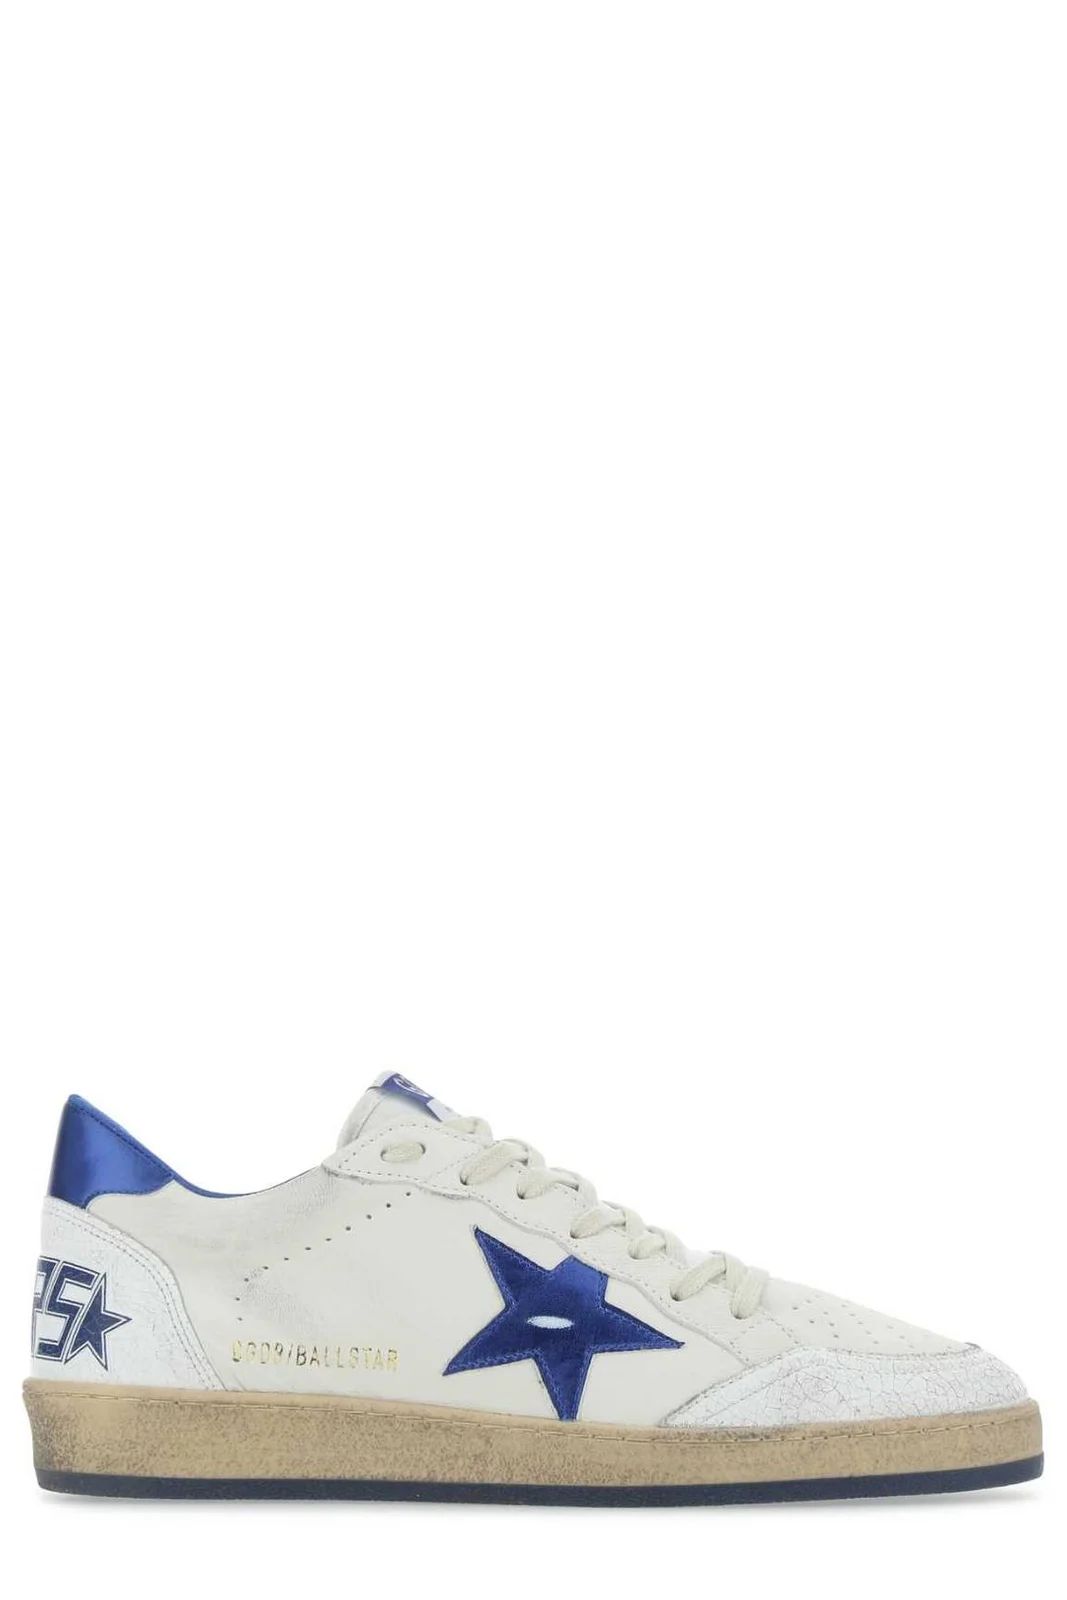 Golden Goose Deluxe Brand Ball Star Lace-Up Sneakers | Cettire Global